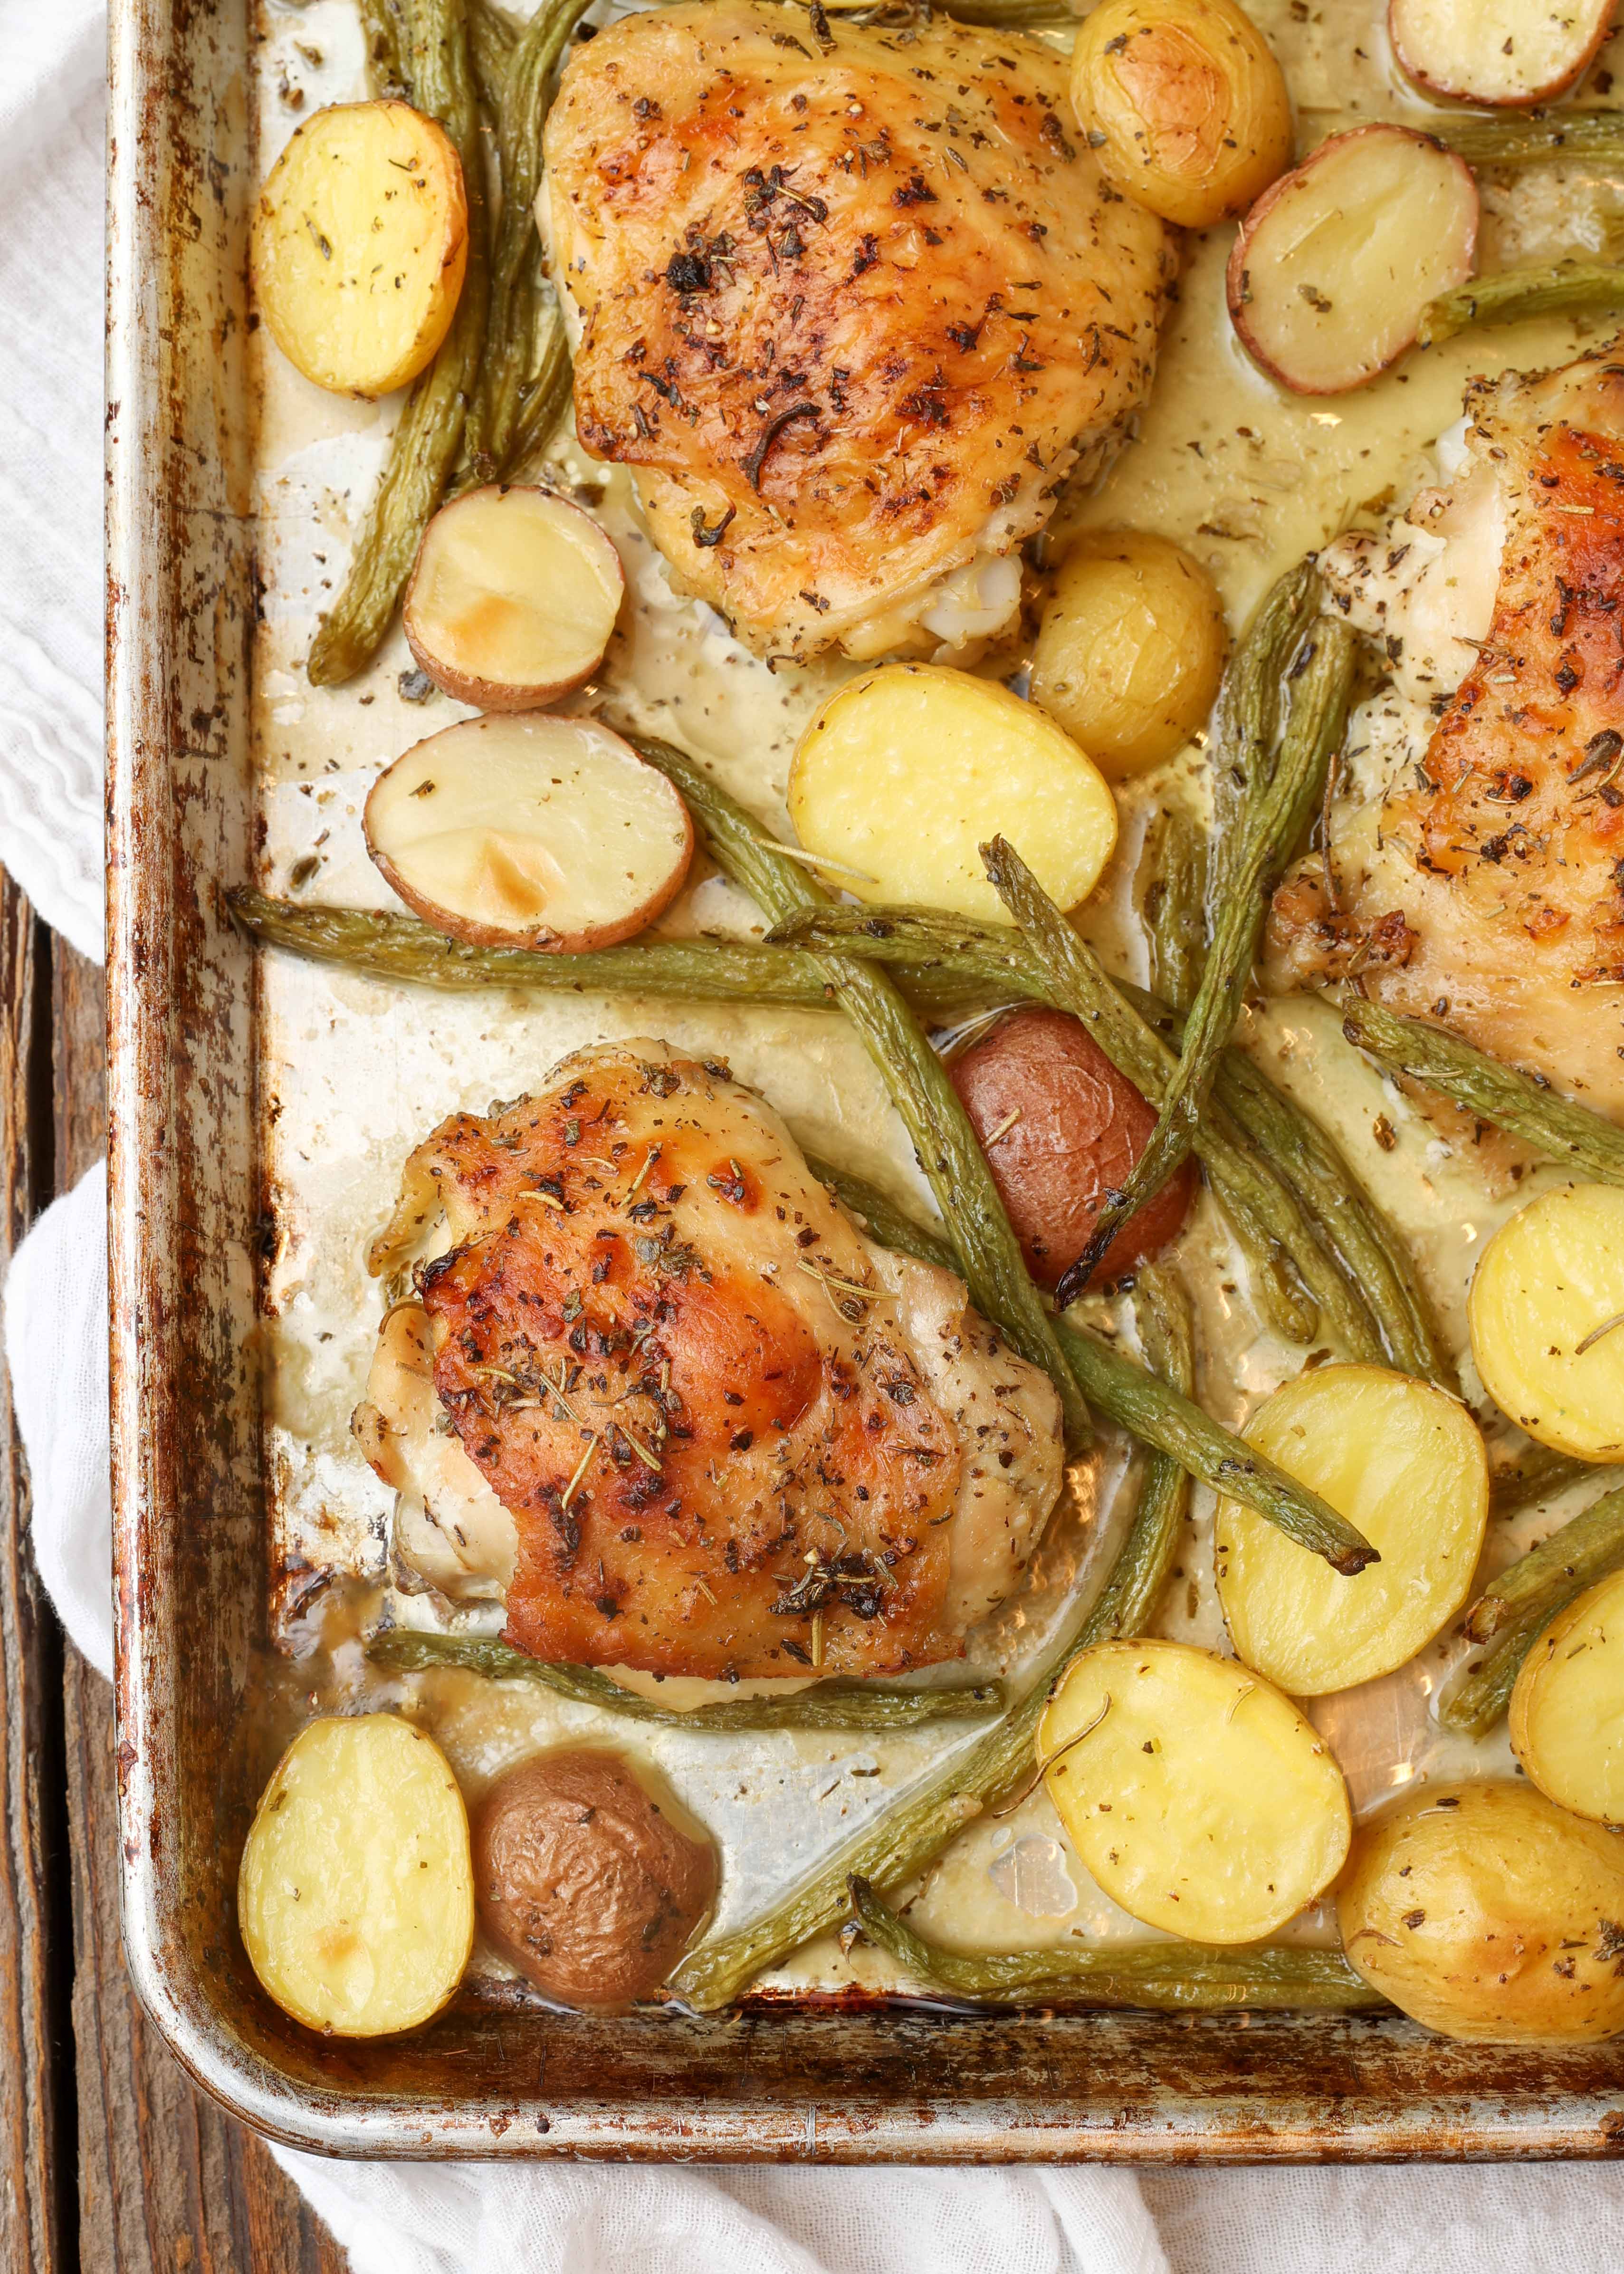 https://barefeetinthekitchen.com/wp-content/uploads/2018/11/Sheet-Pan-Chicken-with-Green-Beans-and-Potatoes-BFK-2-1-of-1.jpg